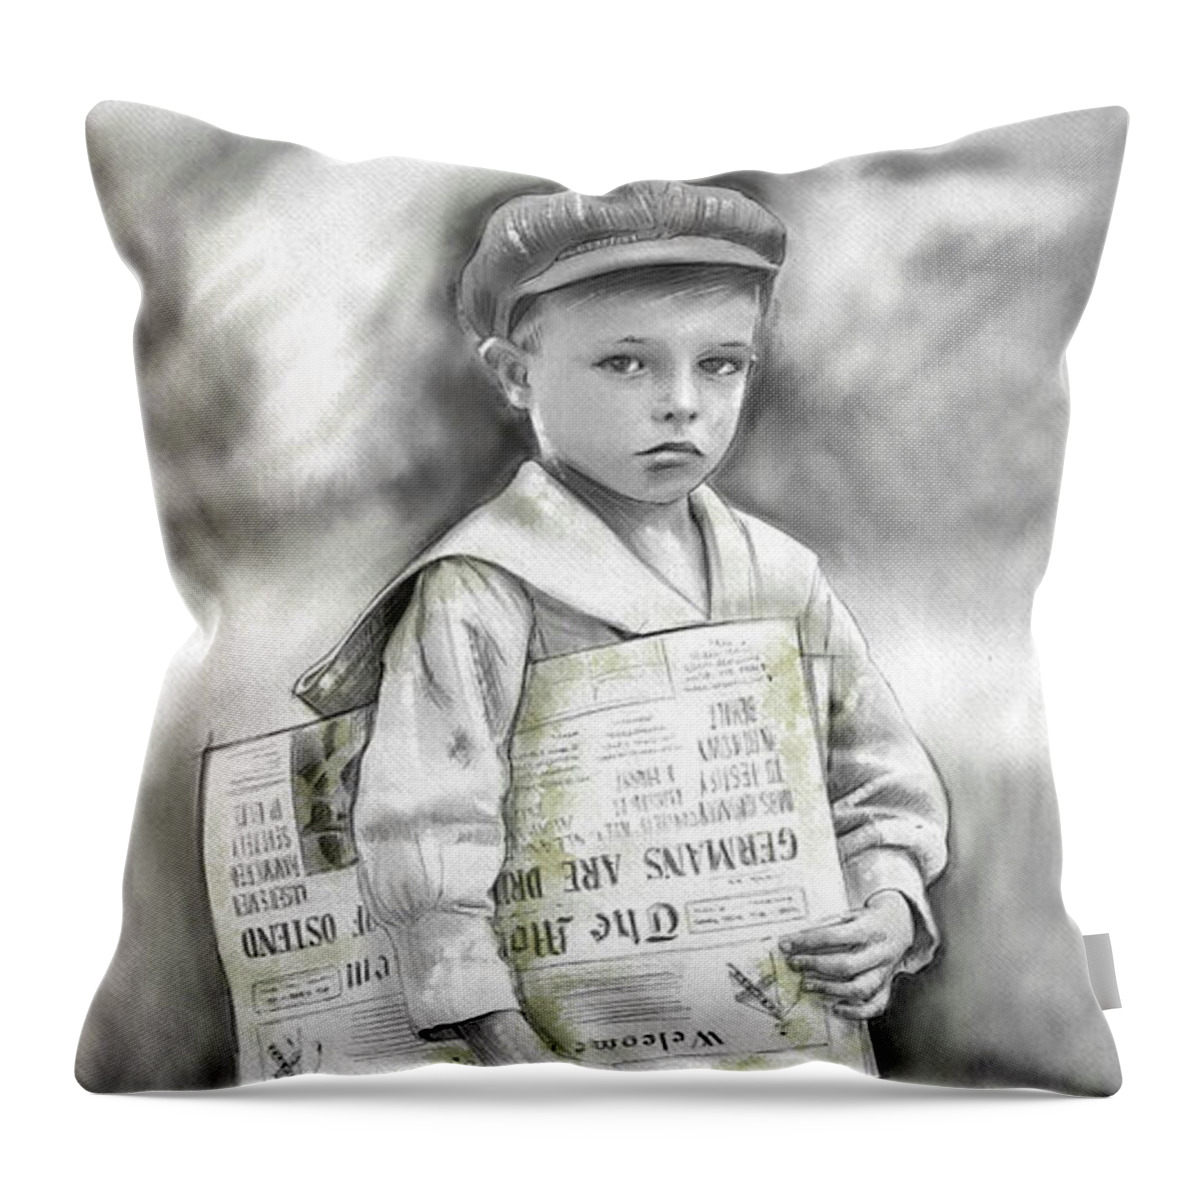 World War 2 Throw Pillow featuring the mixed media World War 2 Paperboy by Mark Tonelli